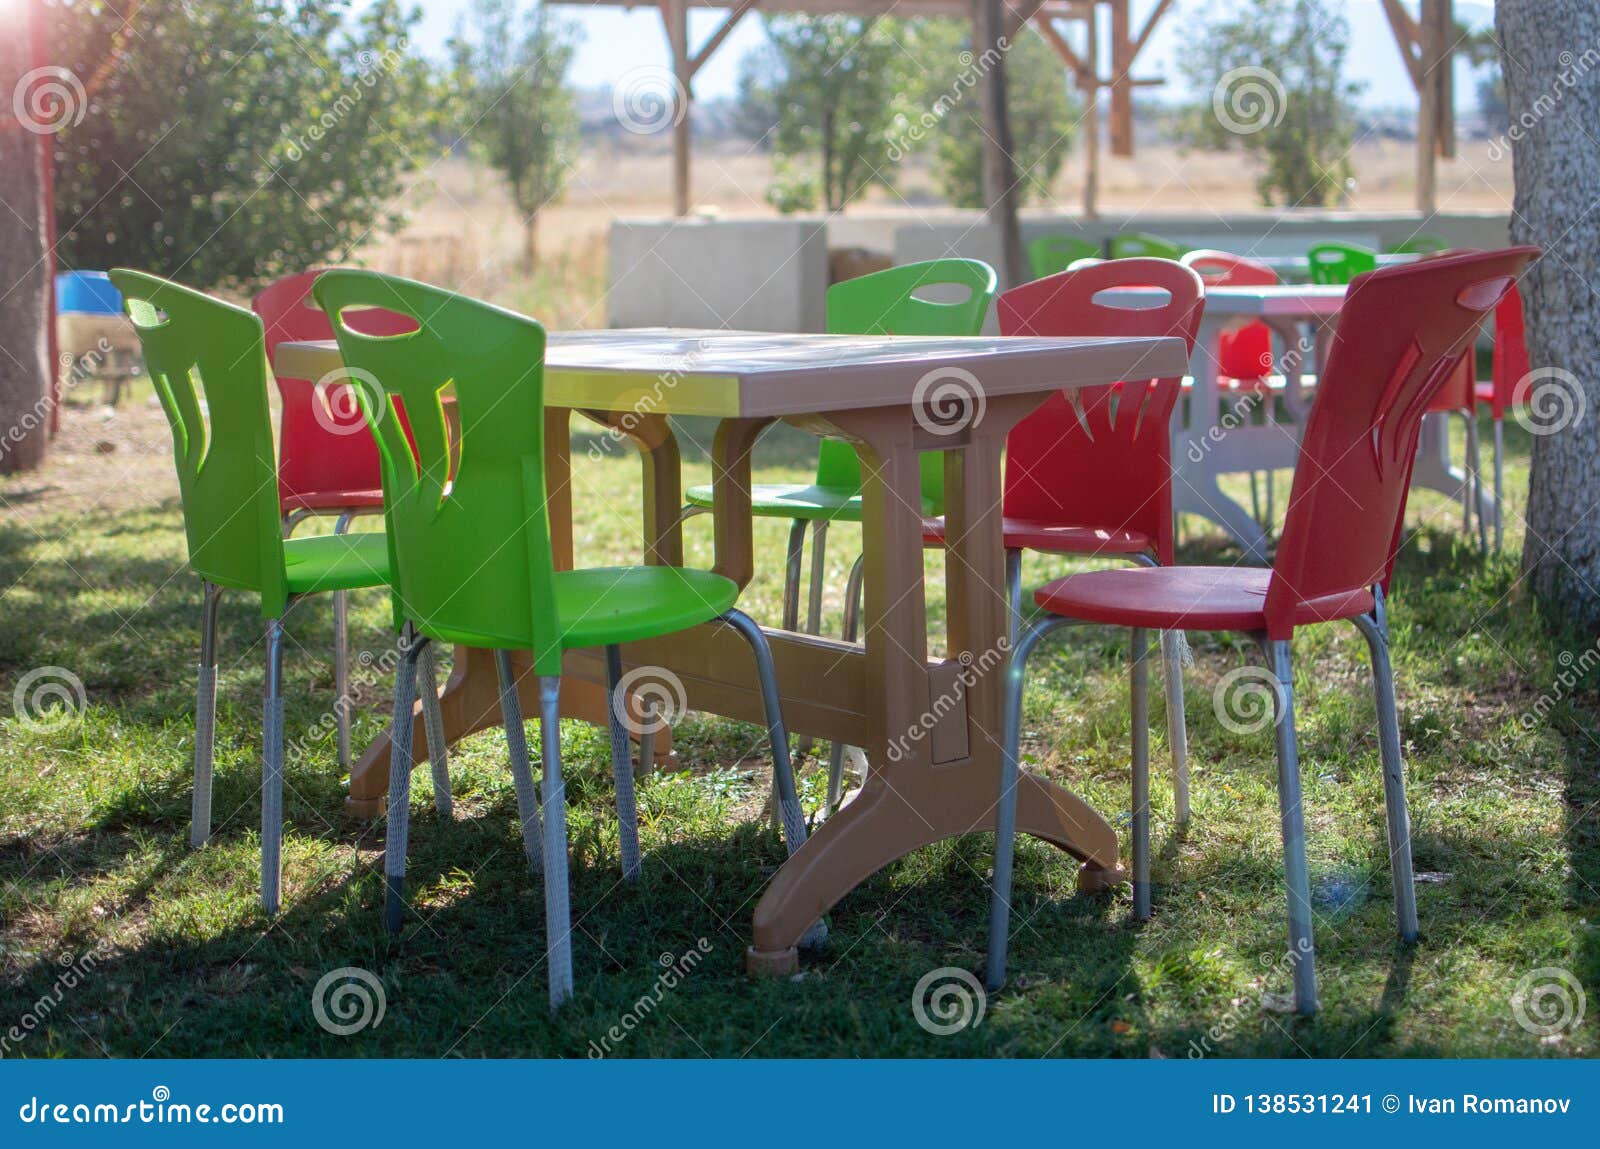 Plastic Table And Chairs Outside In A Garden On Green Lawn Stock